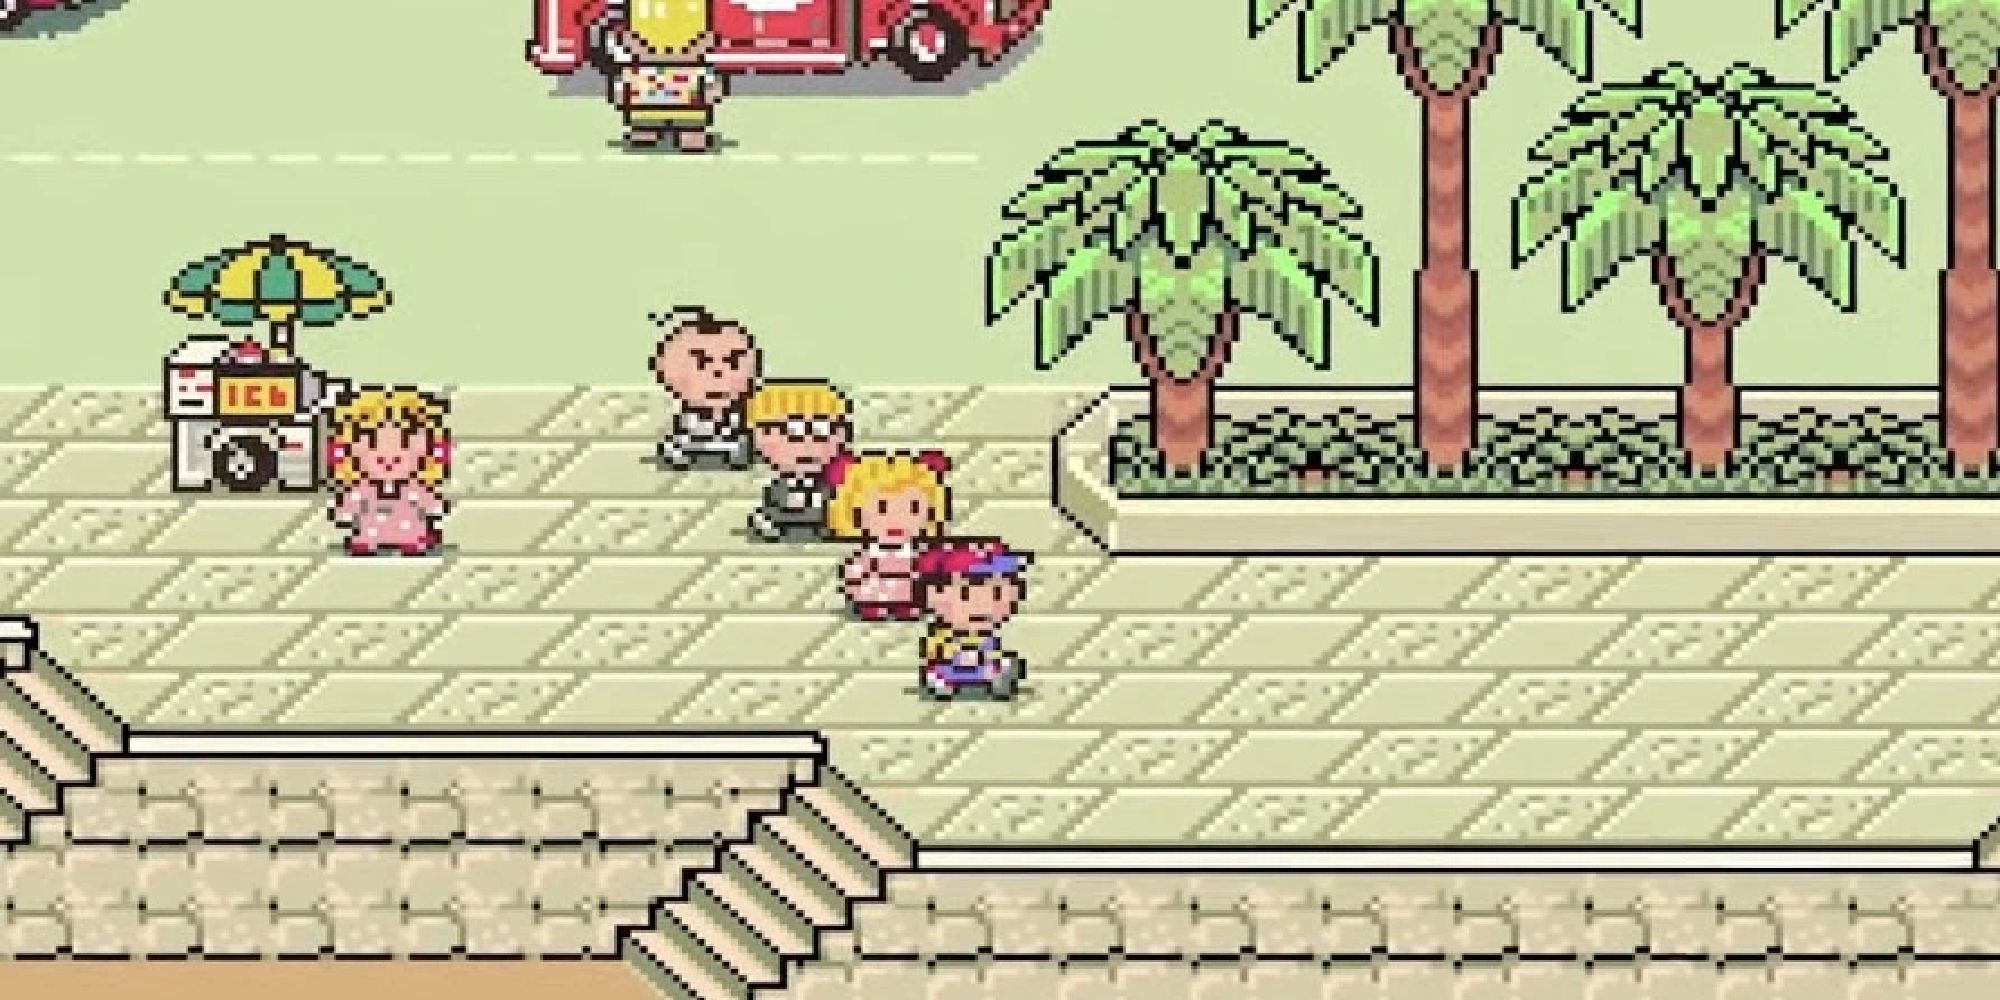 EarthBound Beginnings, or Mother, in all its picealted glory. Four youths are seen walking through a town in a staggered formation.